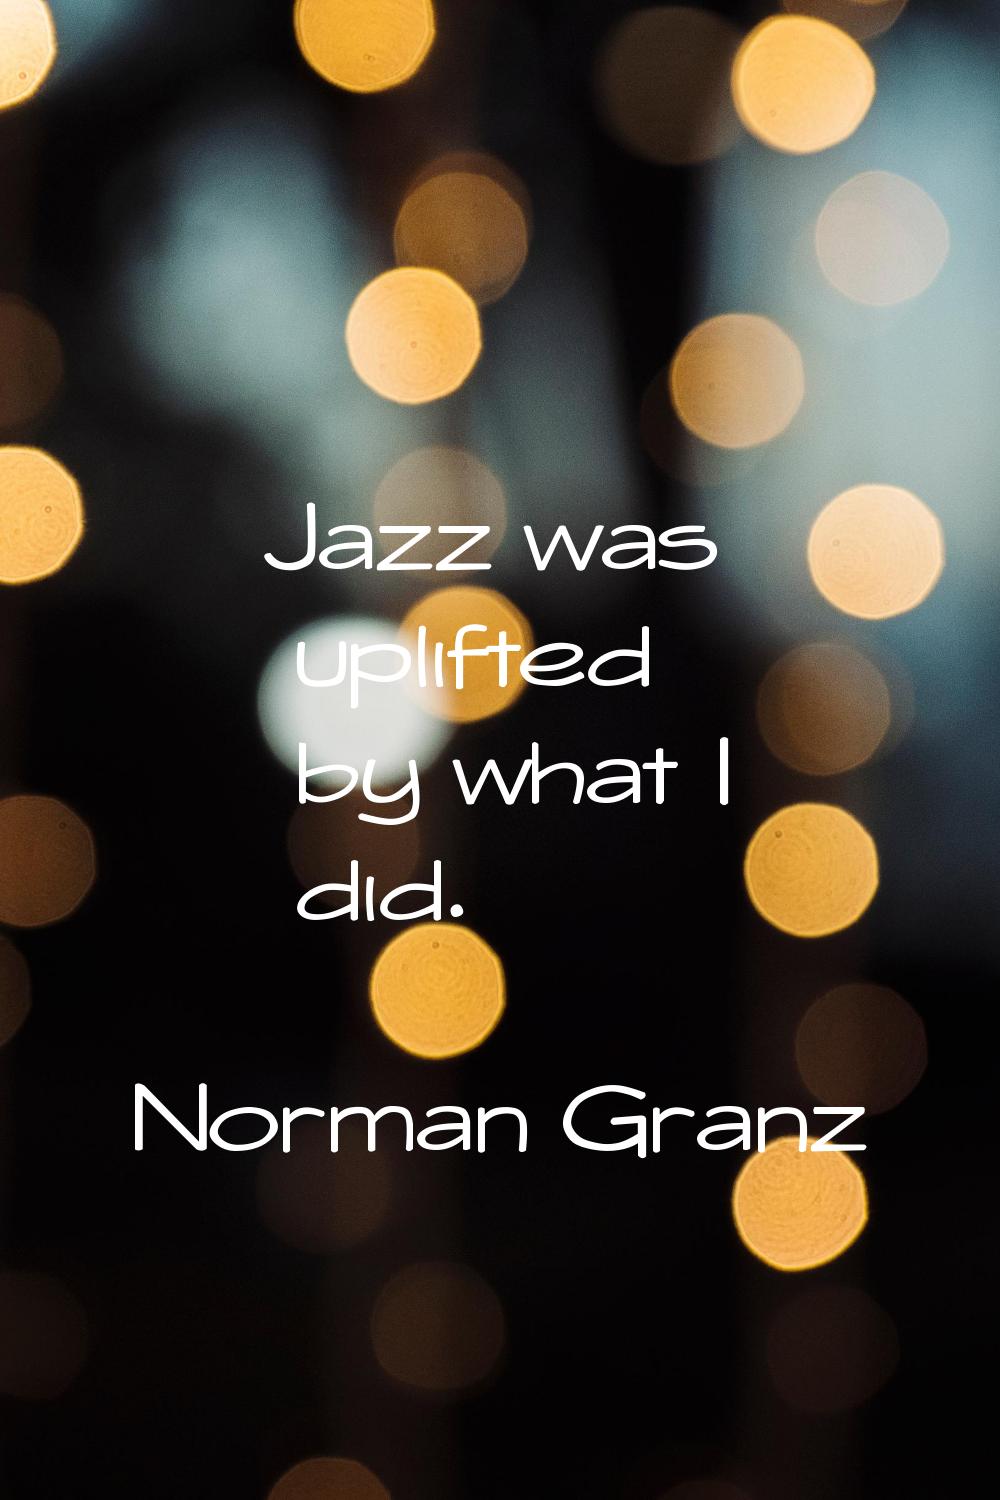 Jazz was uplifted by what I did.